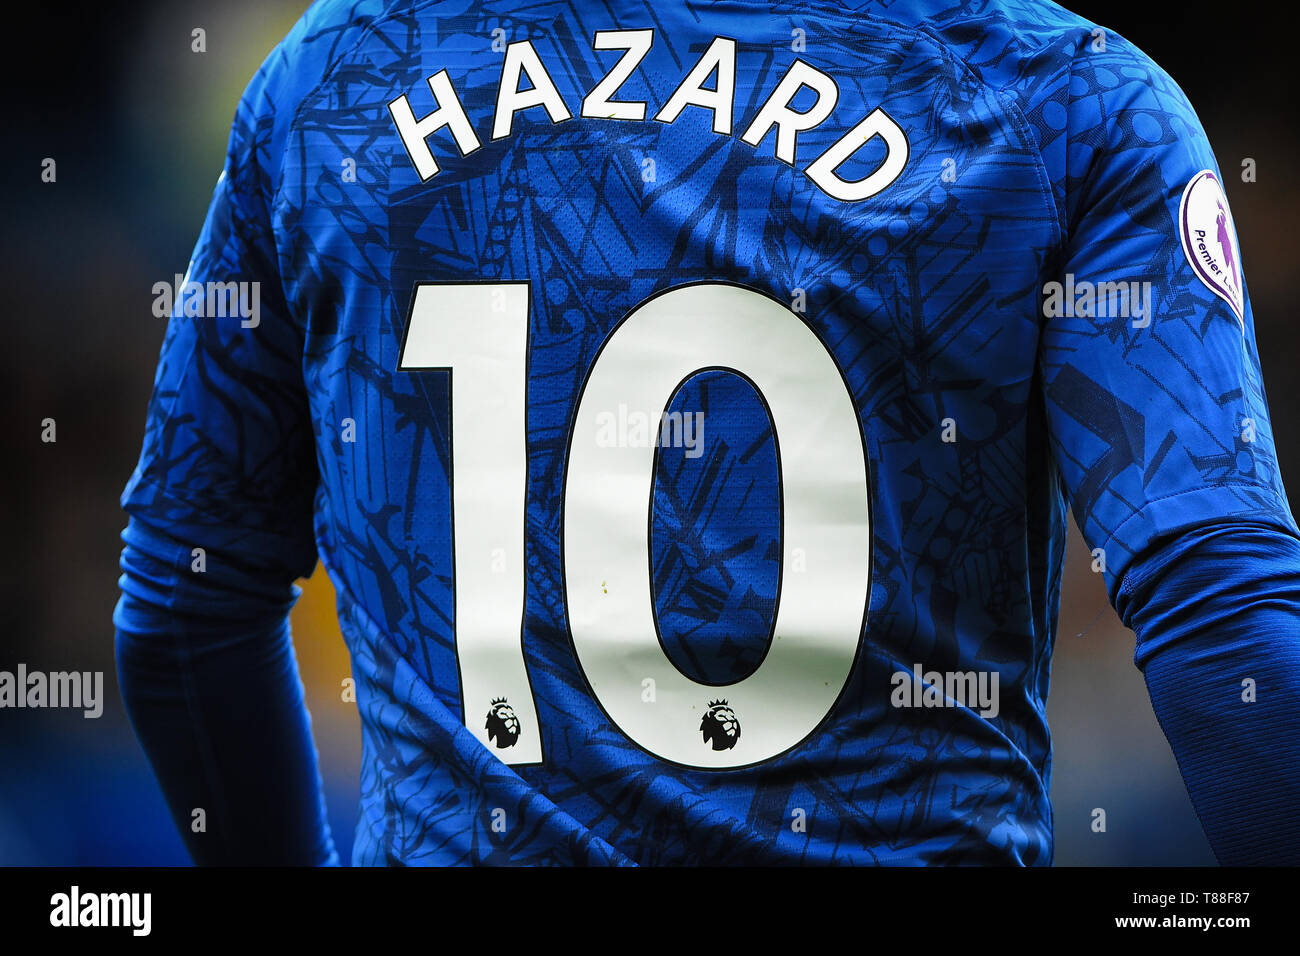 Eden Hazard of Chelsea in the new 2019/20 shirt - Chelsea v Watford,  Premier League, Stamford Bridge, London - 5th May 2019 Editorial Use Only -  DataCo restrictions apply Stock Photo - Alamy